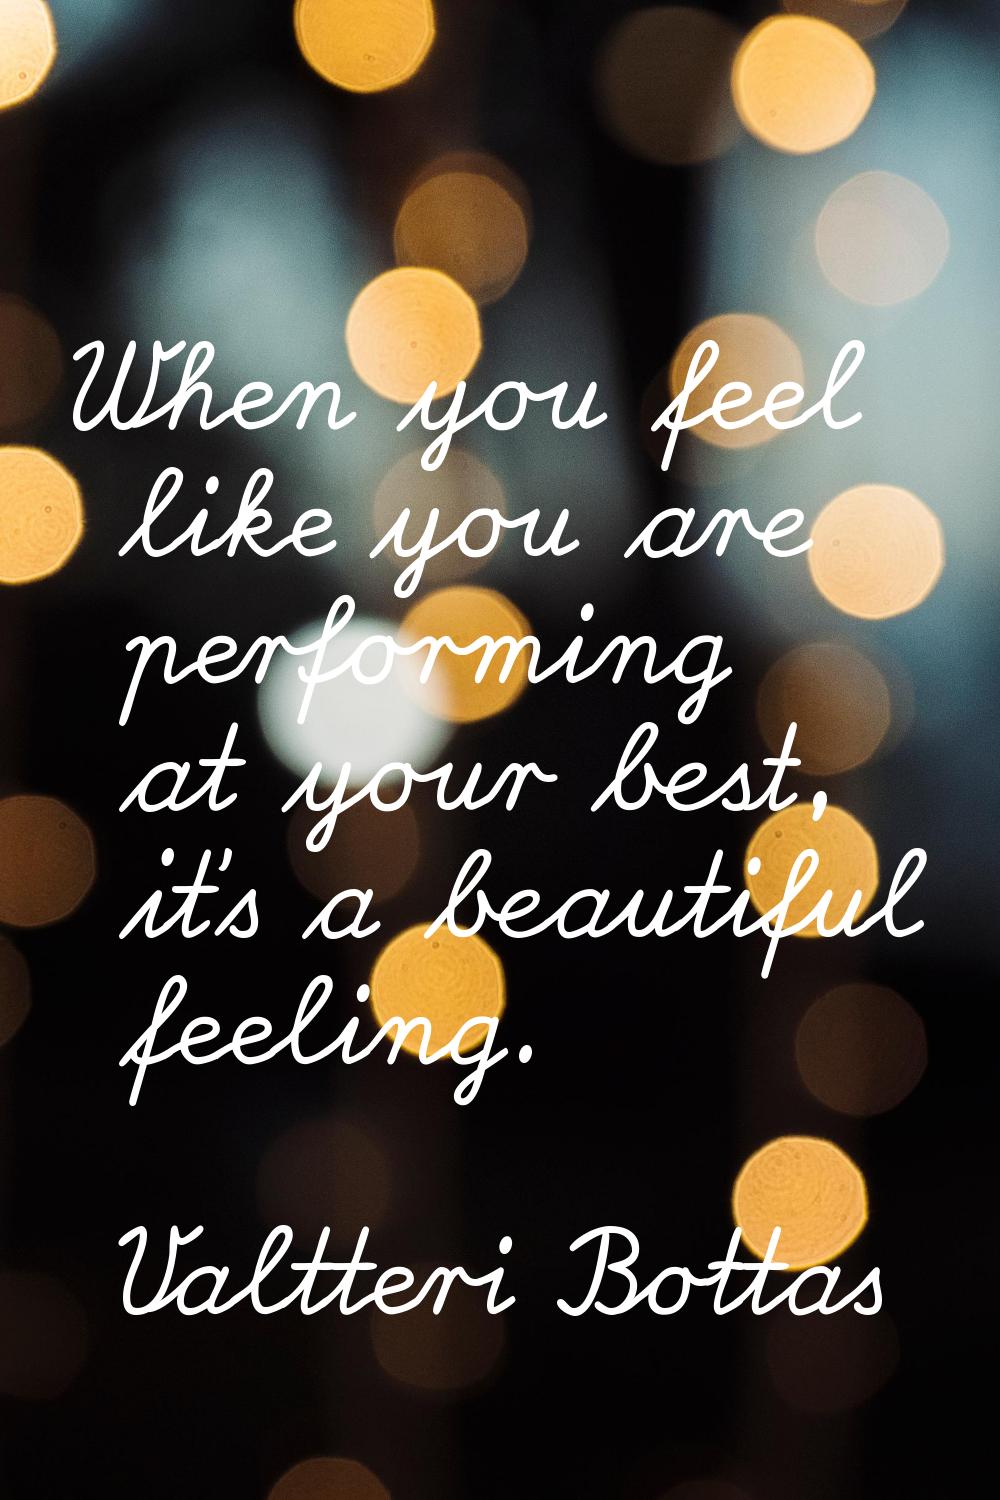 When you feel like you are performing at your best, it's a beautiful feeling.